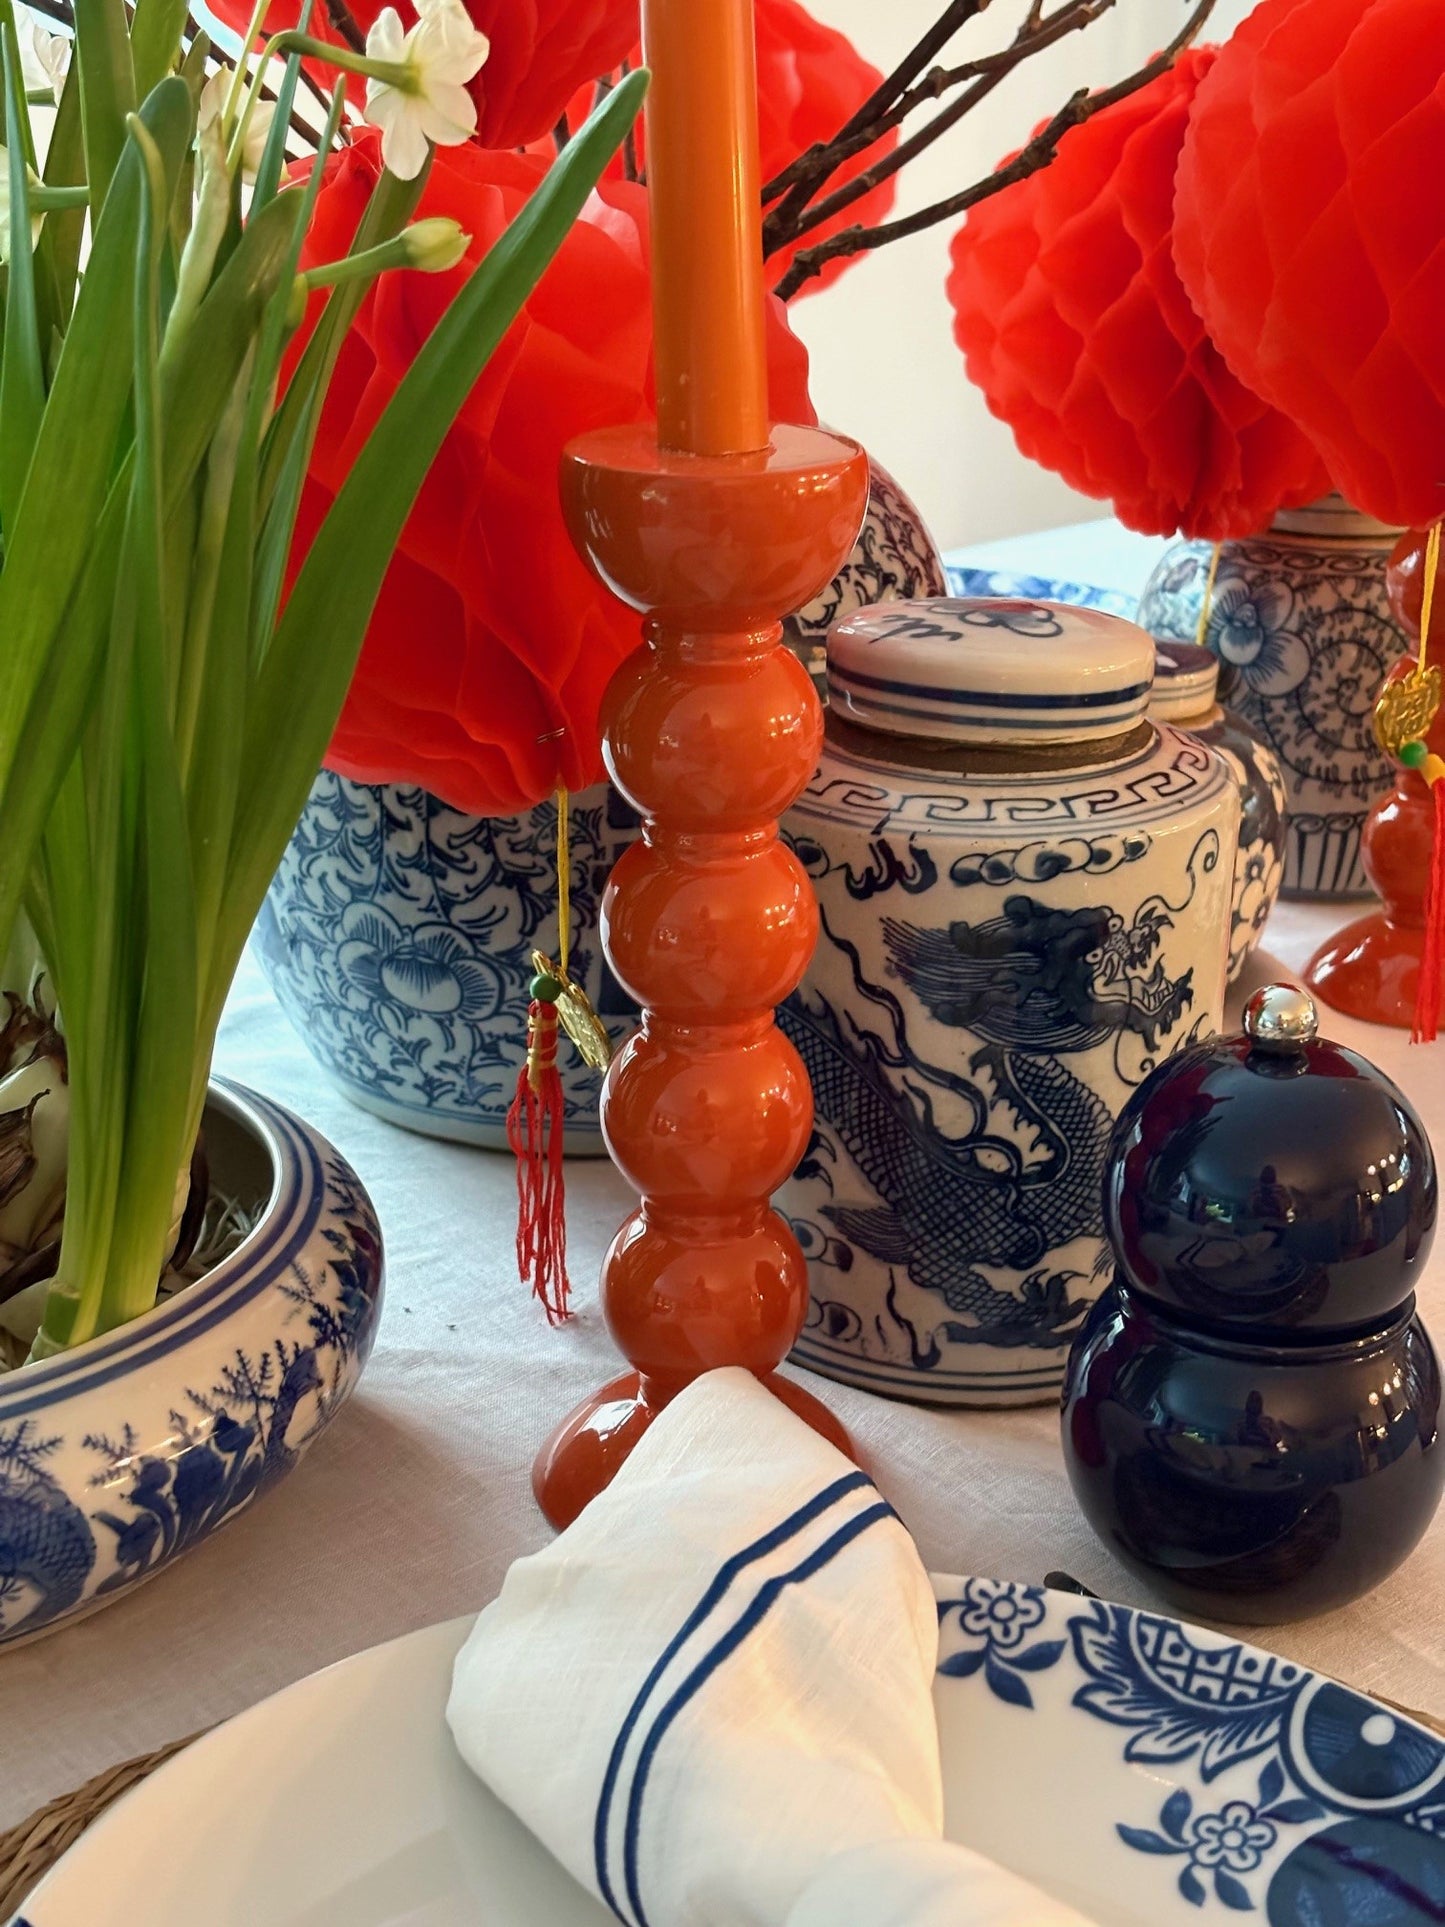 A Chinese New Year table setting featuring a blue and white dragon ginger jar and an orange candlestick and narcissus flowers.